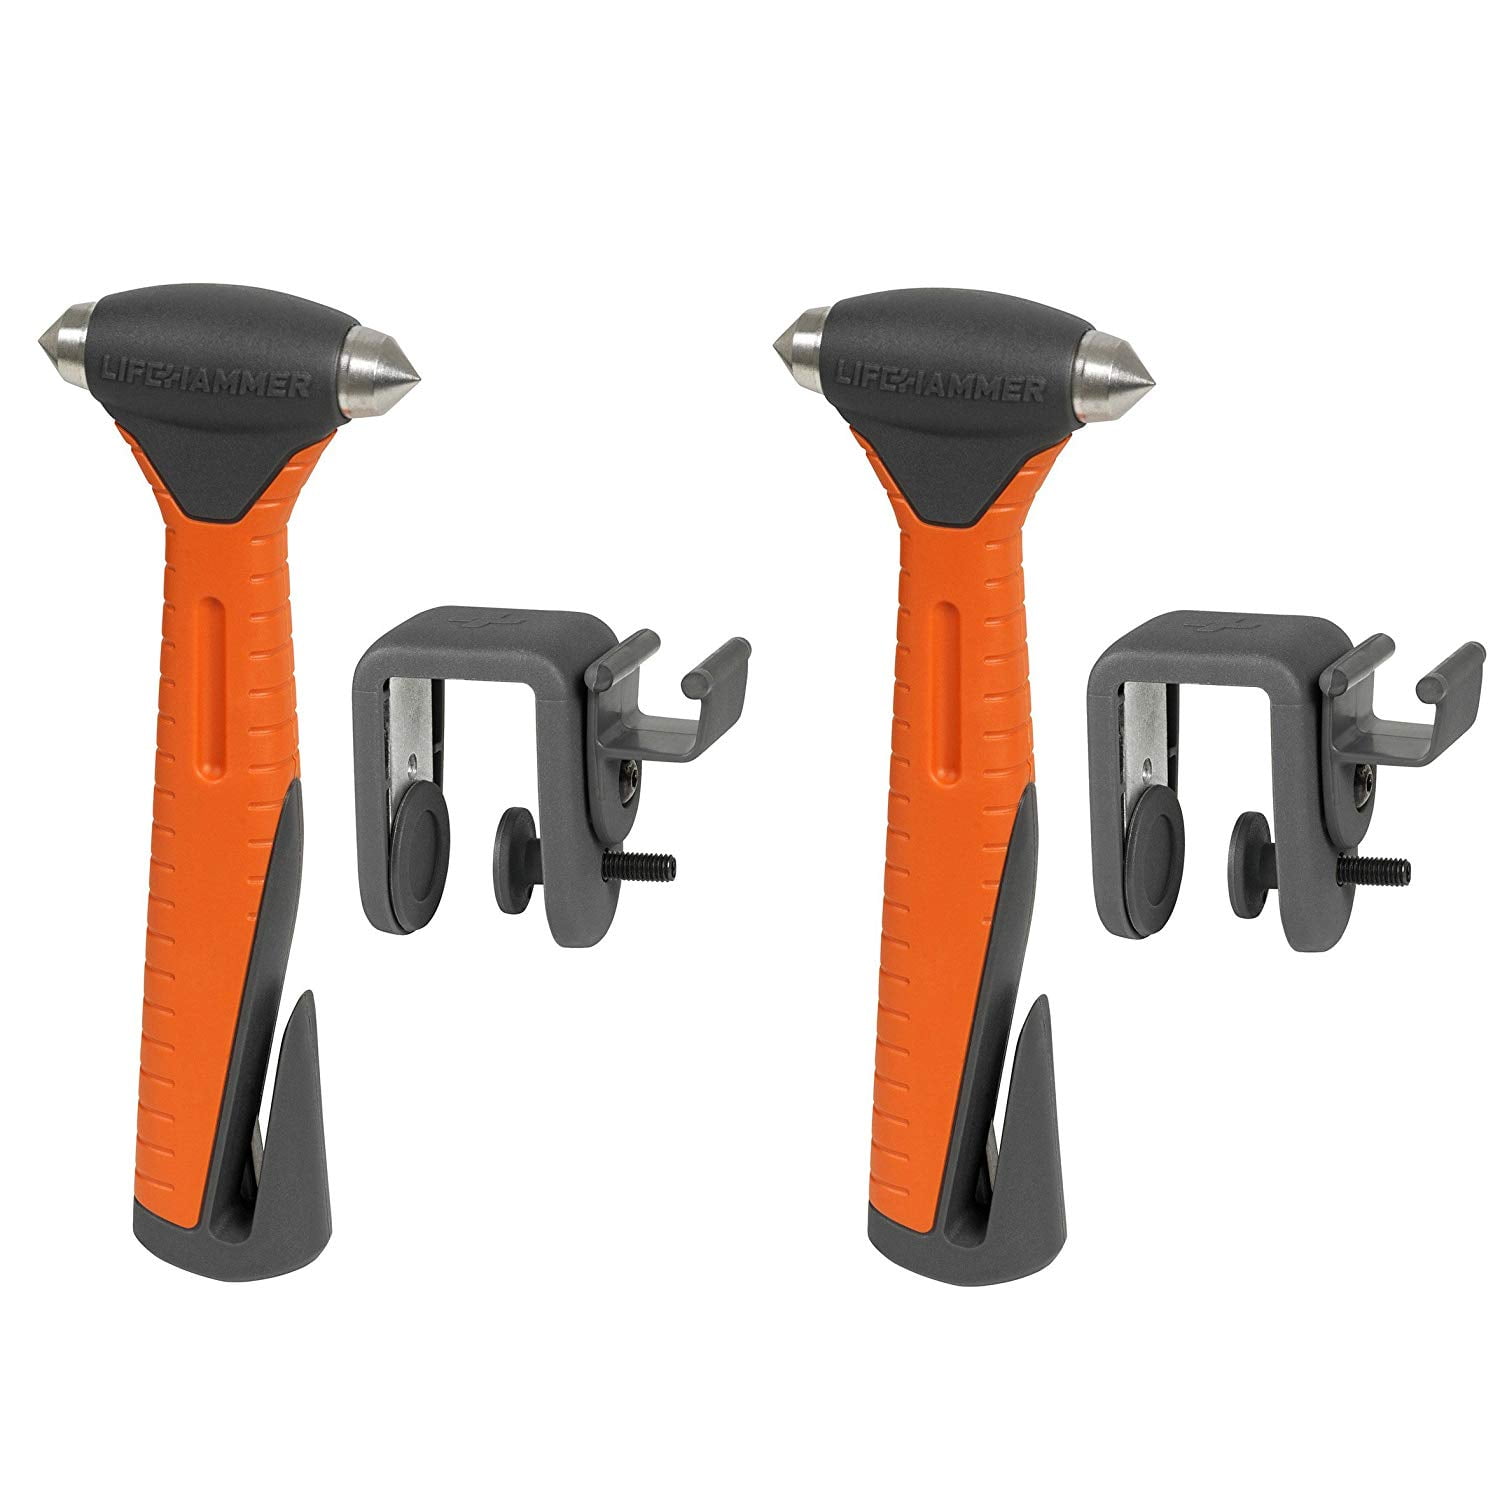 Lifehammer Safety Hammer Plus - Emergency Escape and Rescue Hammer with  Seatbelt Cutter - 2 Pack 